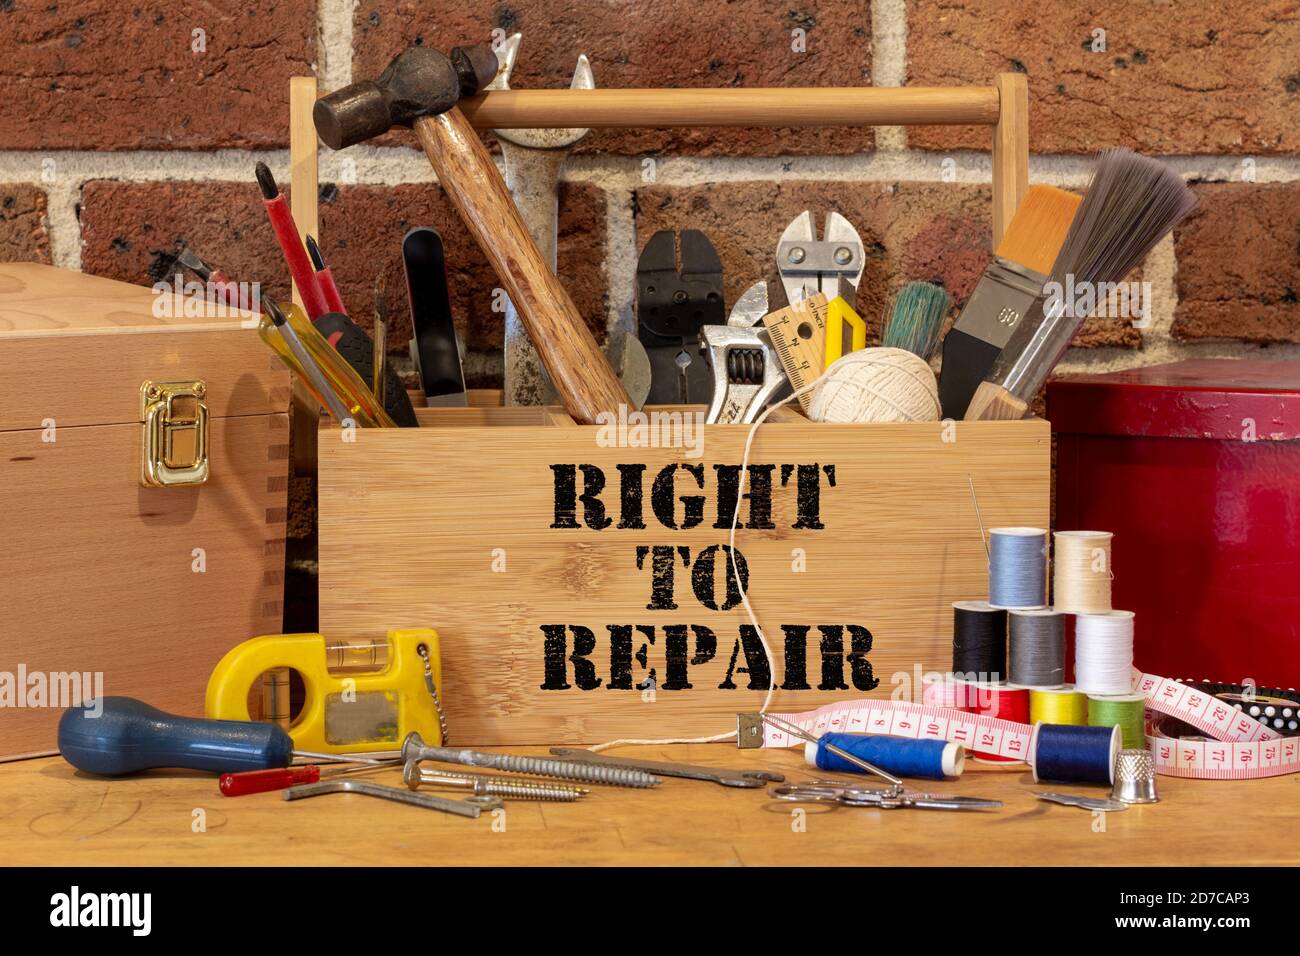 Right to Repair on tool box surrounded by repair tools on bench in cafe used as a repair centre, consumer activism to repair household items to reduce Stock Photo